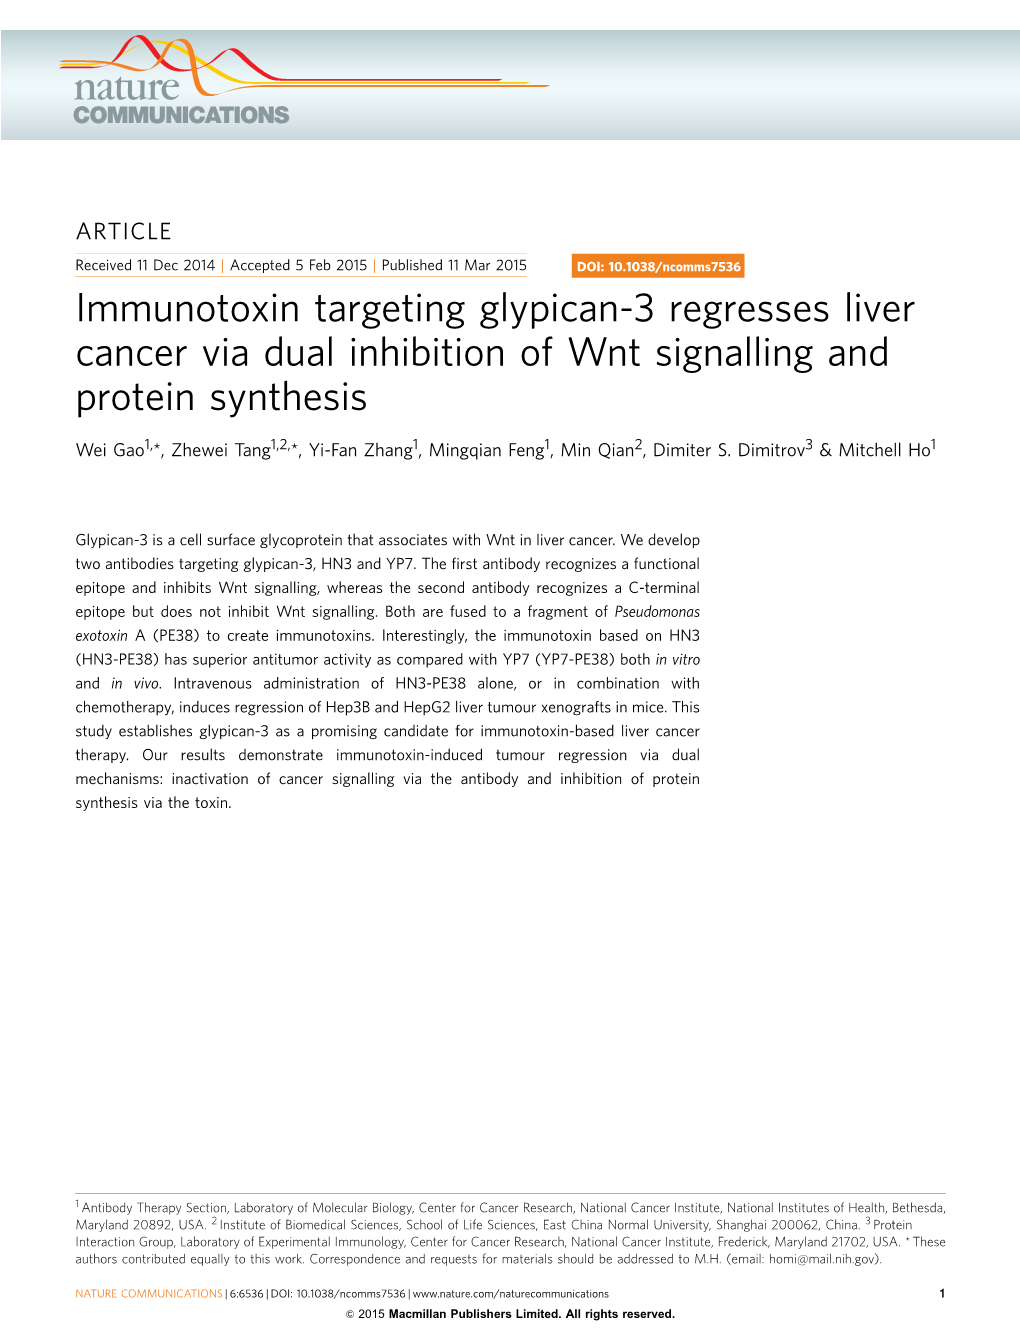 Immunotoxin Targeting Glypican-3 Regresses Liver Cancer Via Dual Inhibition of Wnt Signalling and Protein Synthesis